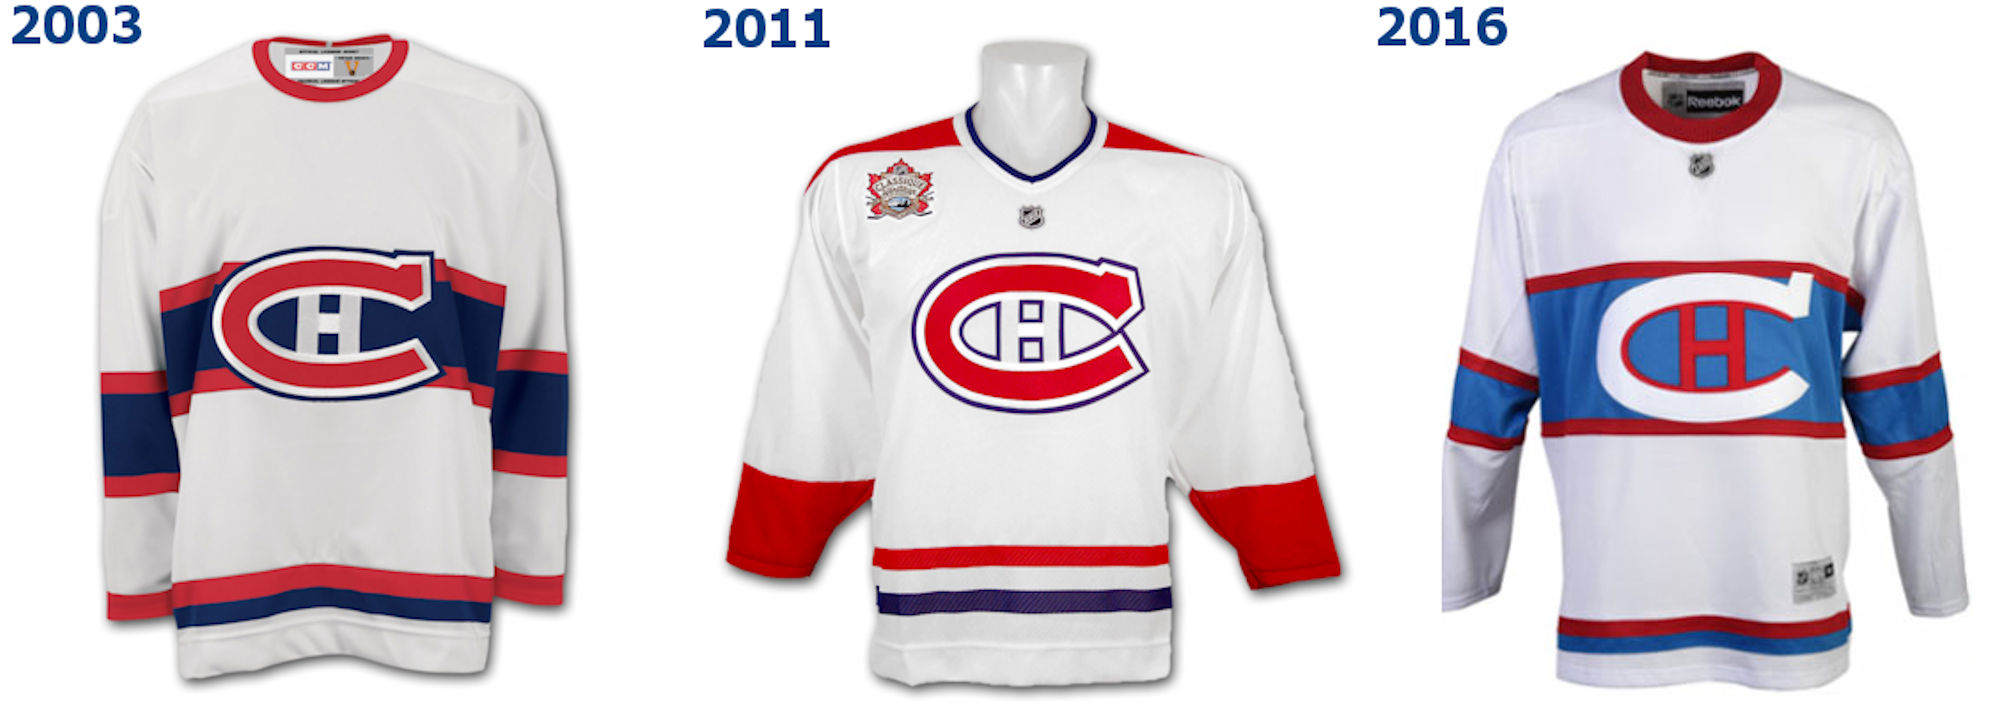 habs heritage classic jersey off 56 